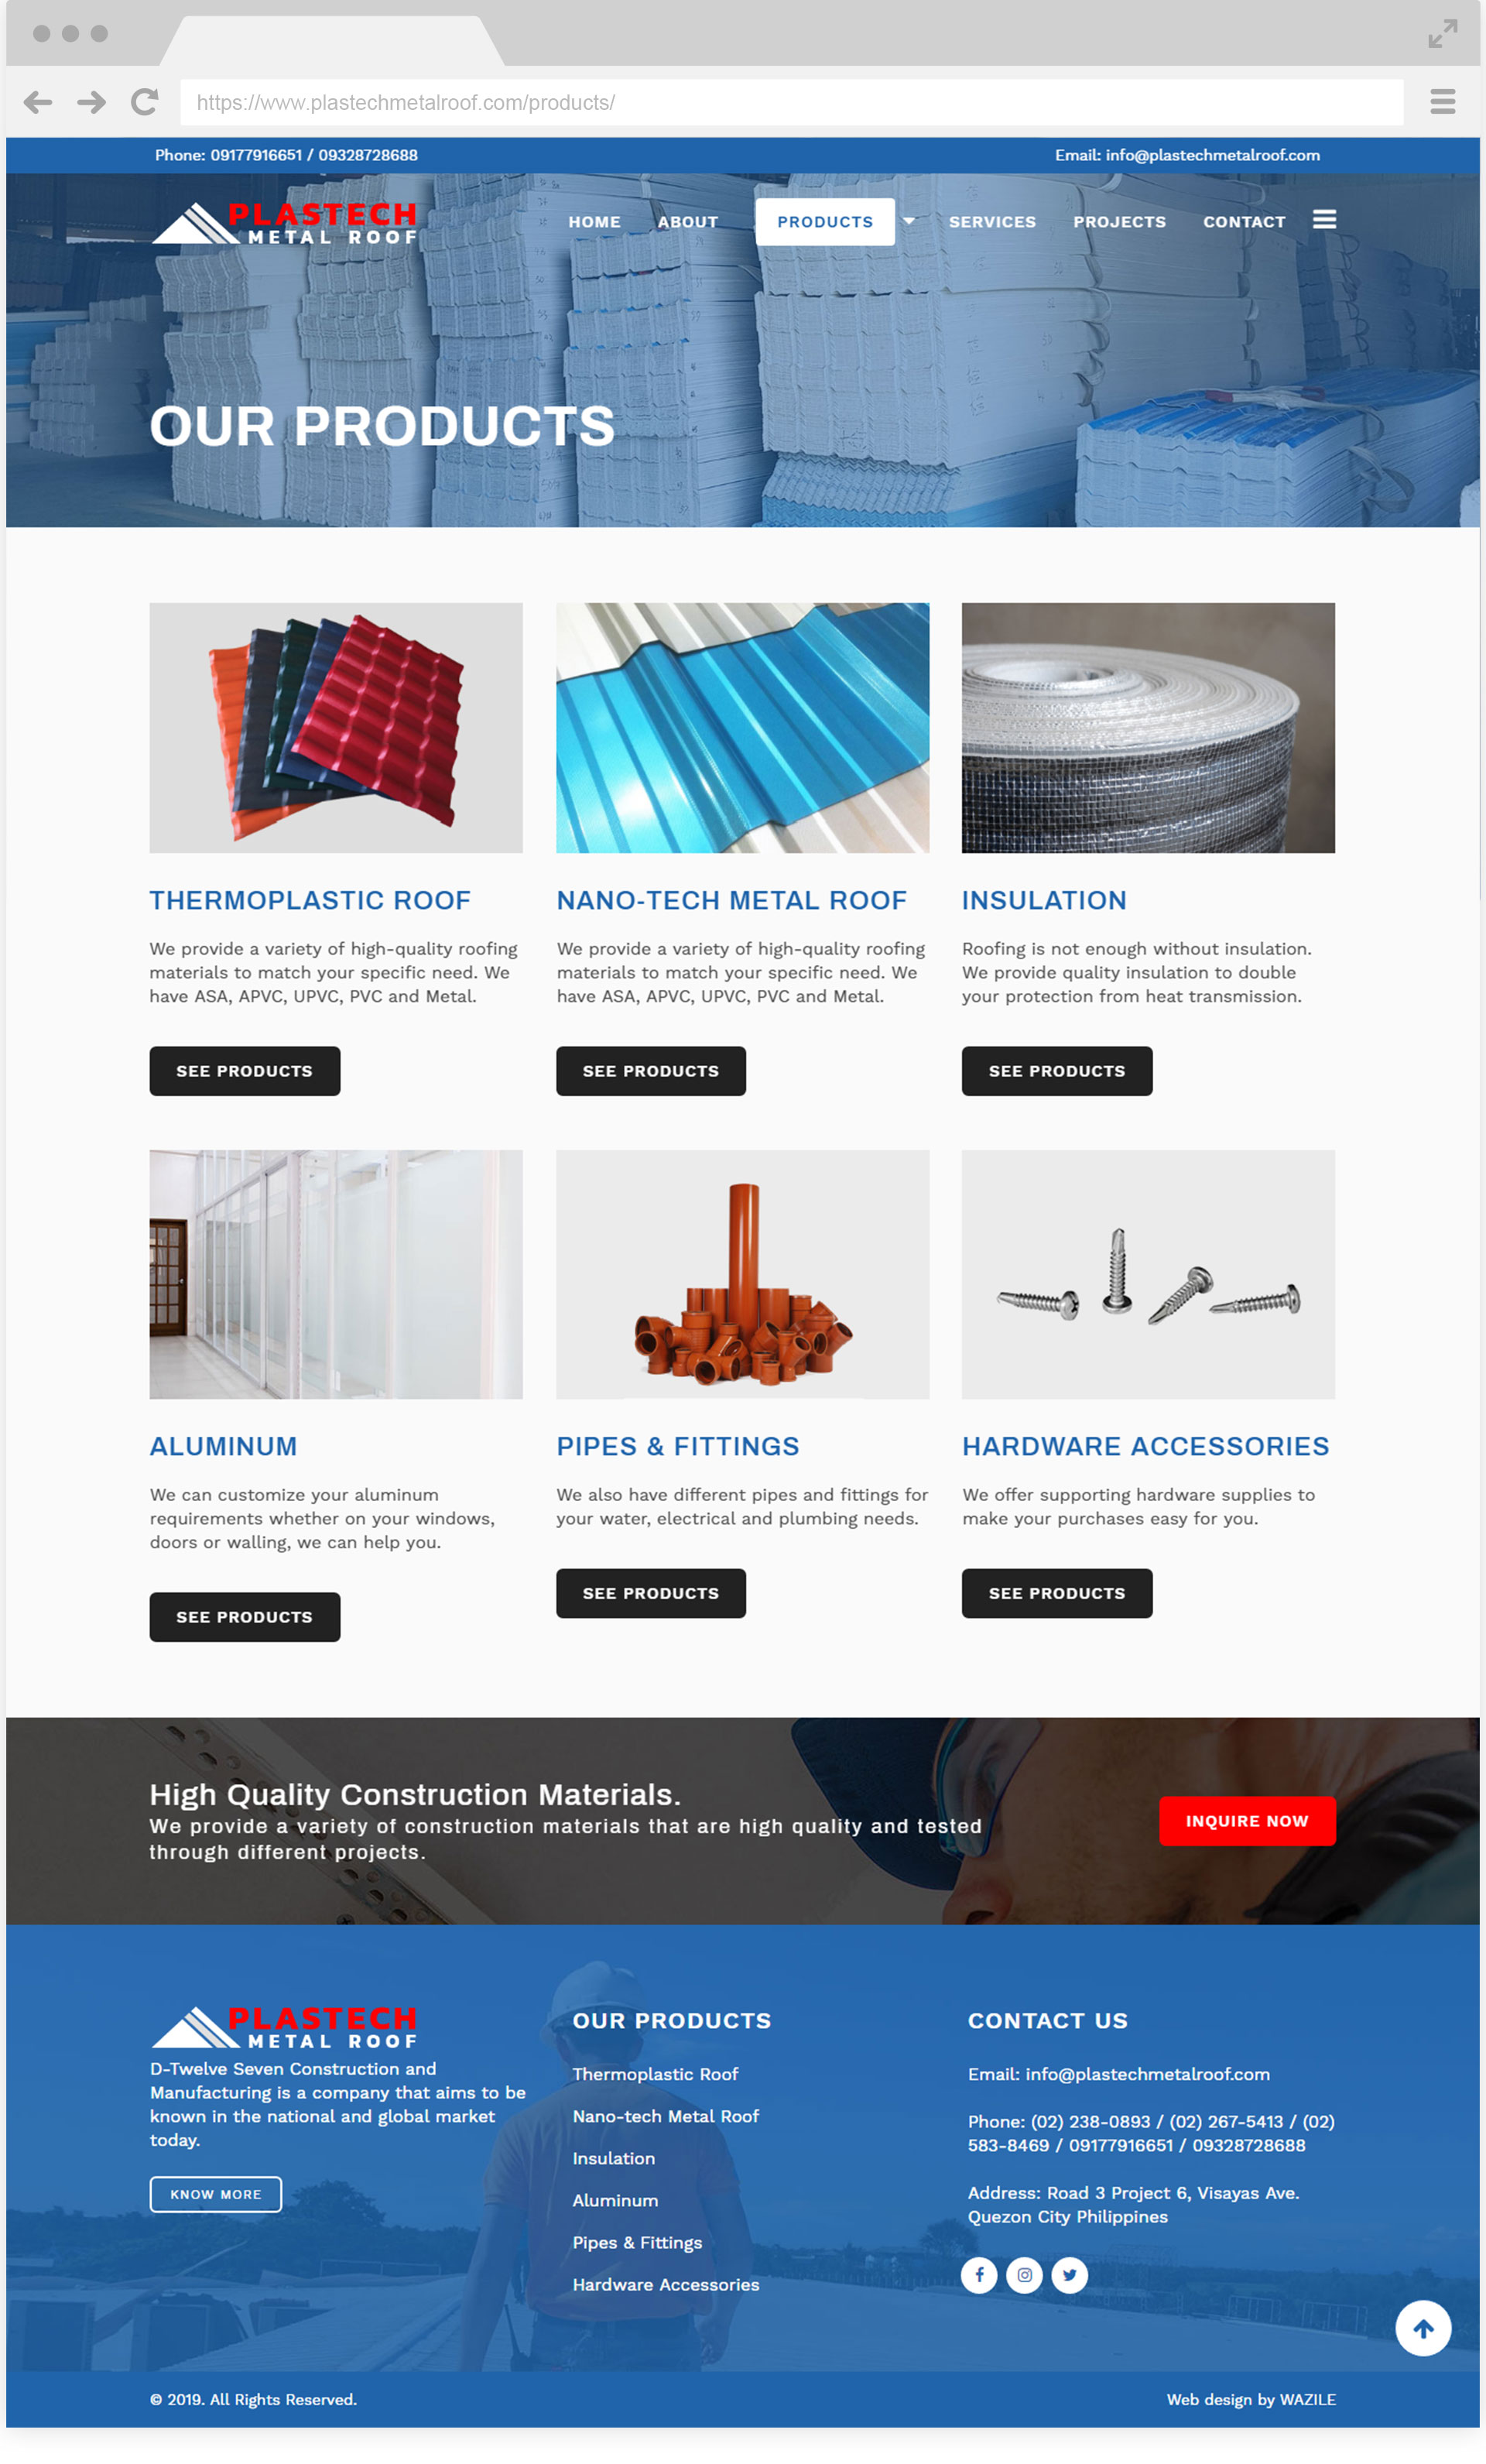 Plastech Metal Roof Products